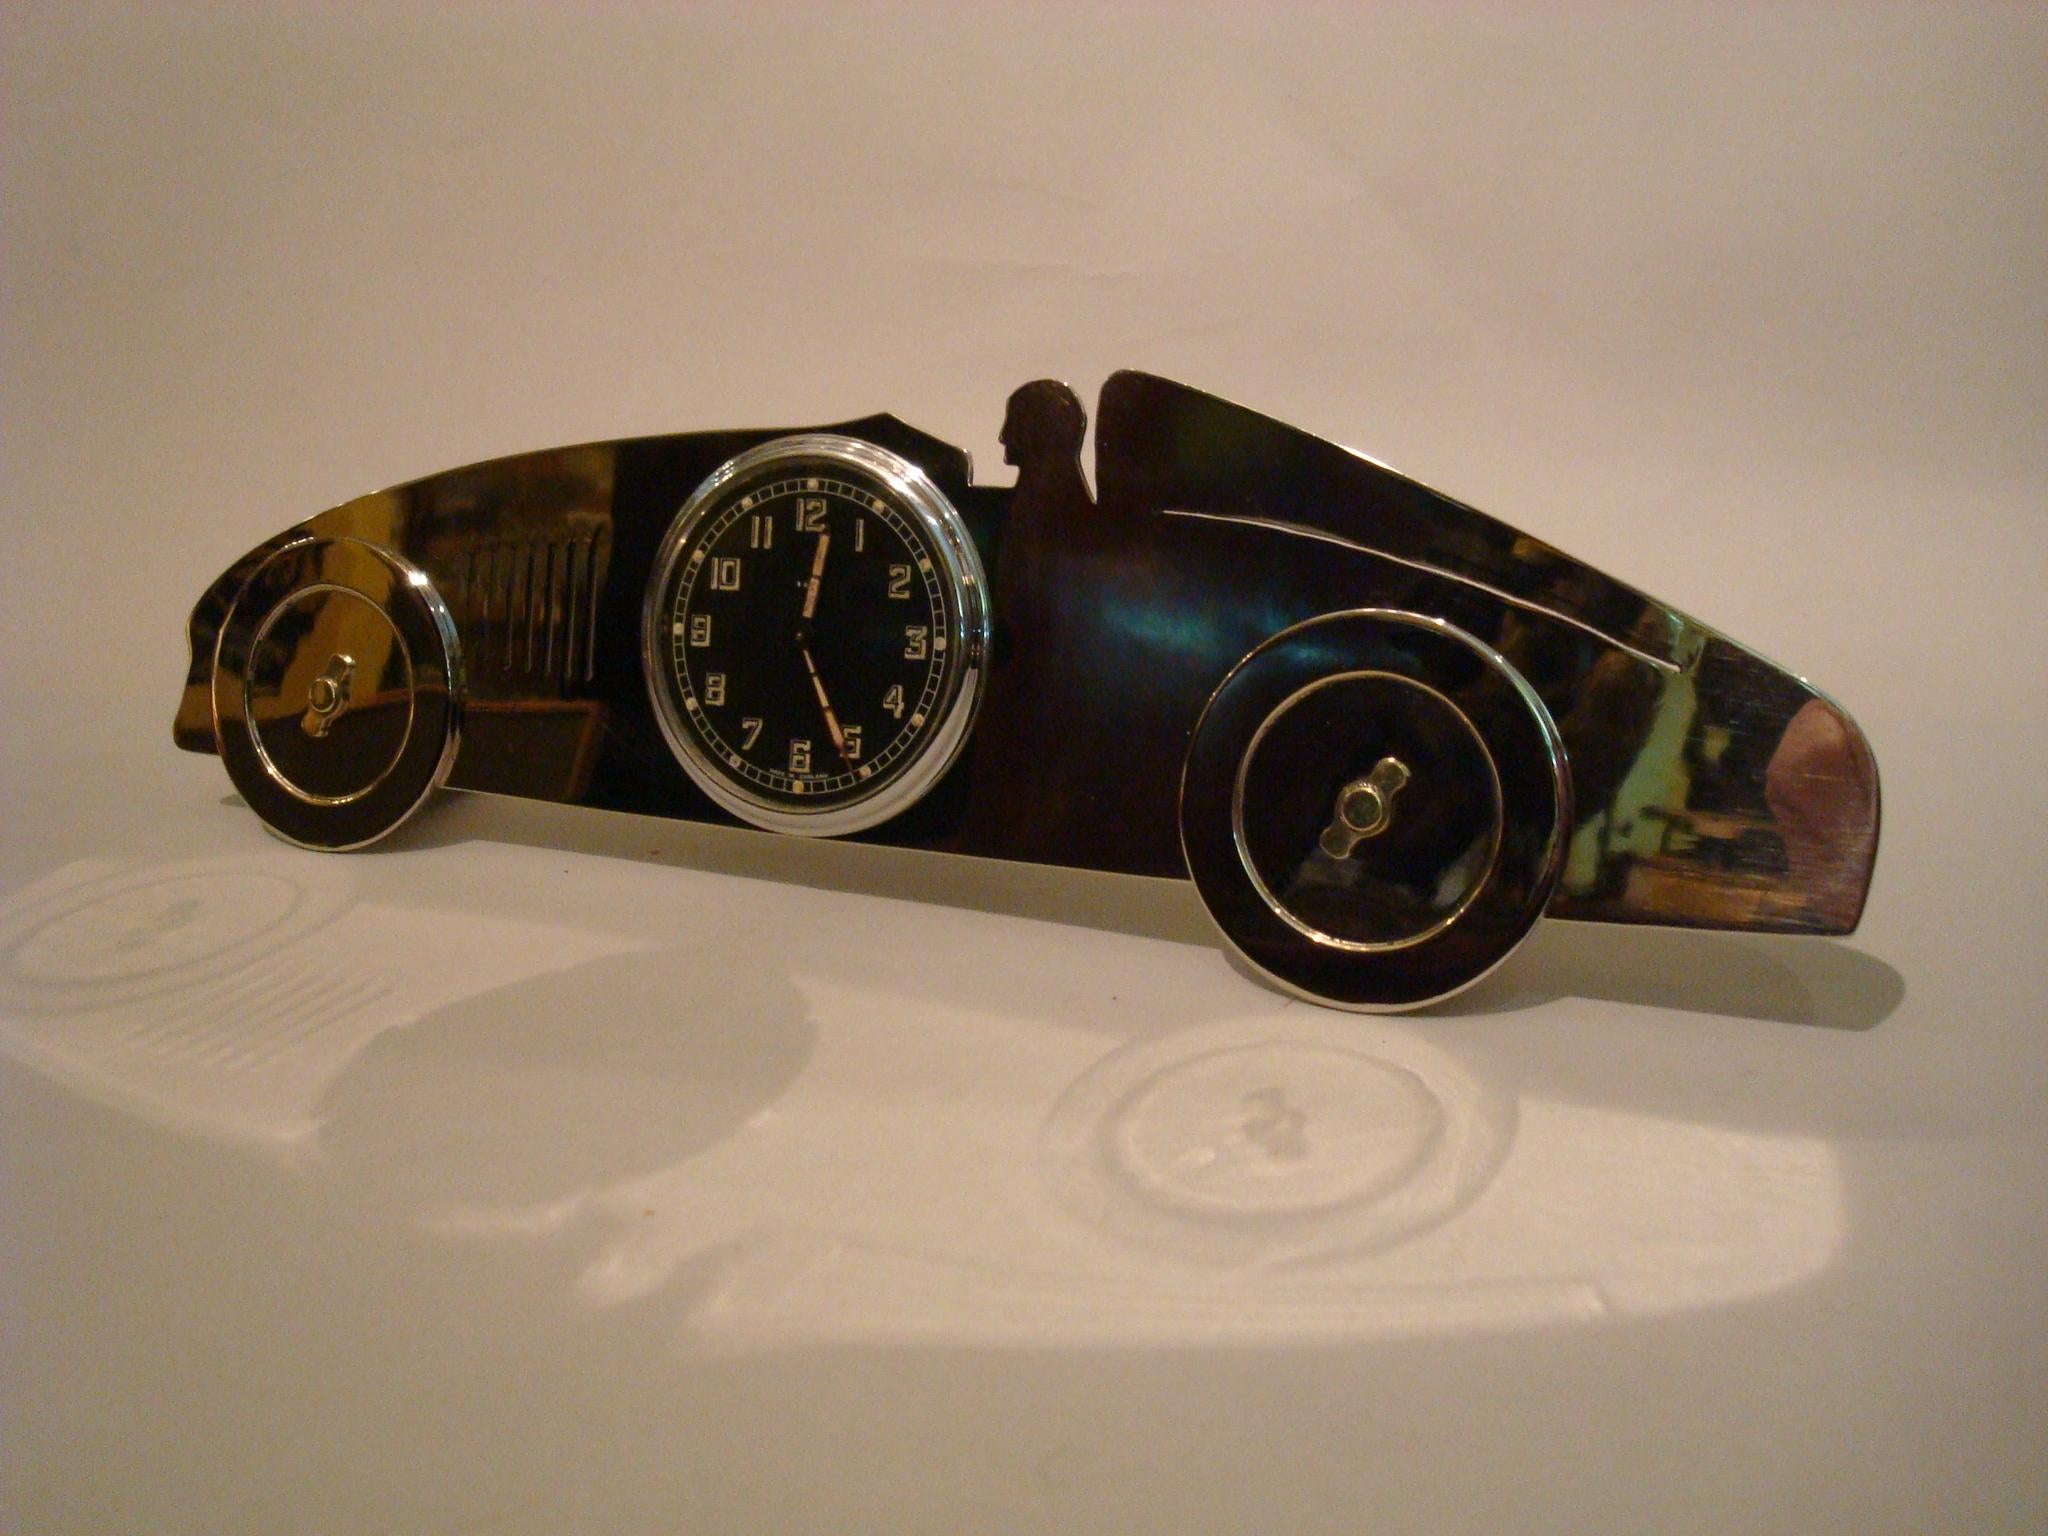 Art Deco racing car desk clock. Looks like an indianapolis racing car.
Ítem has just been restored, it working perfectly.
Perfect gift for any collector of Automobilia / Car Mascot / Hood Ornament.
Made in the U.K. 1920s.